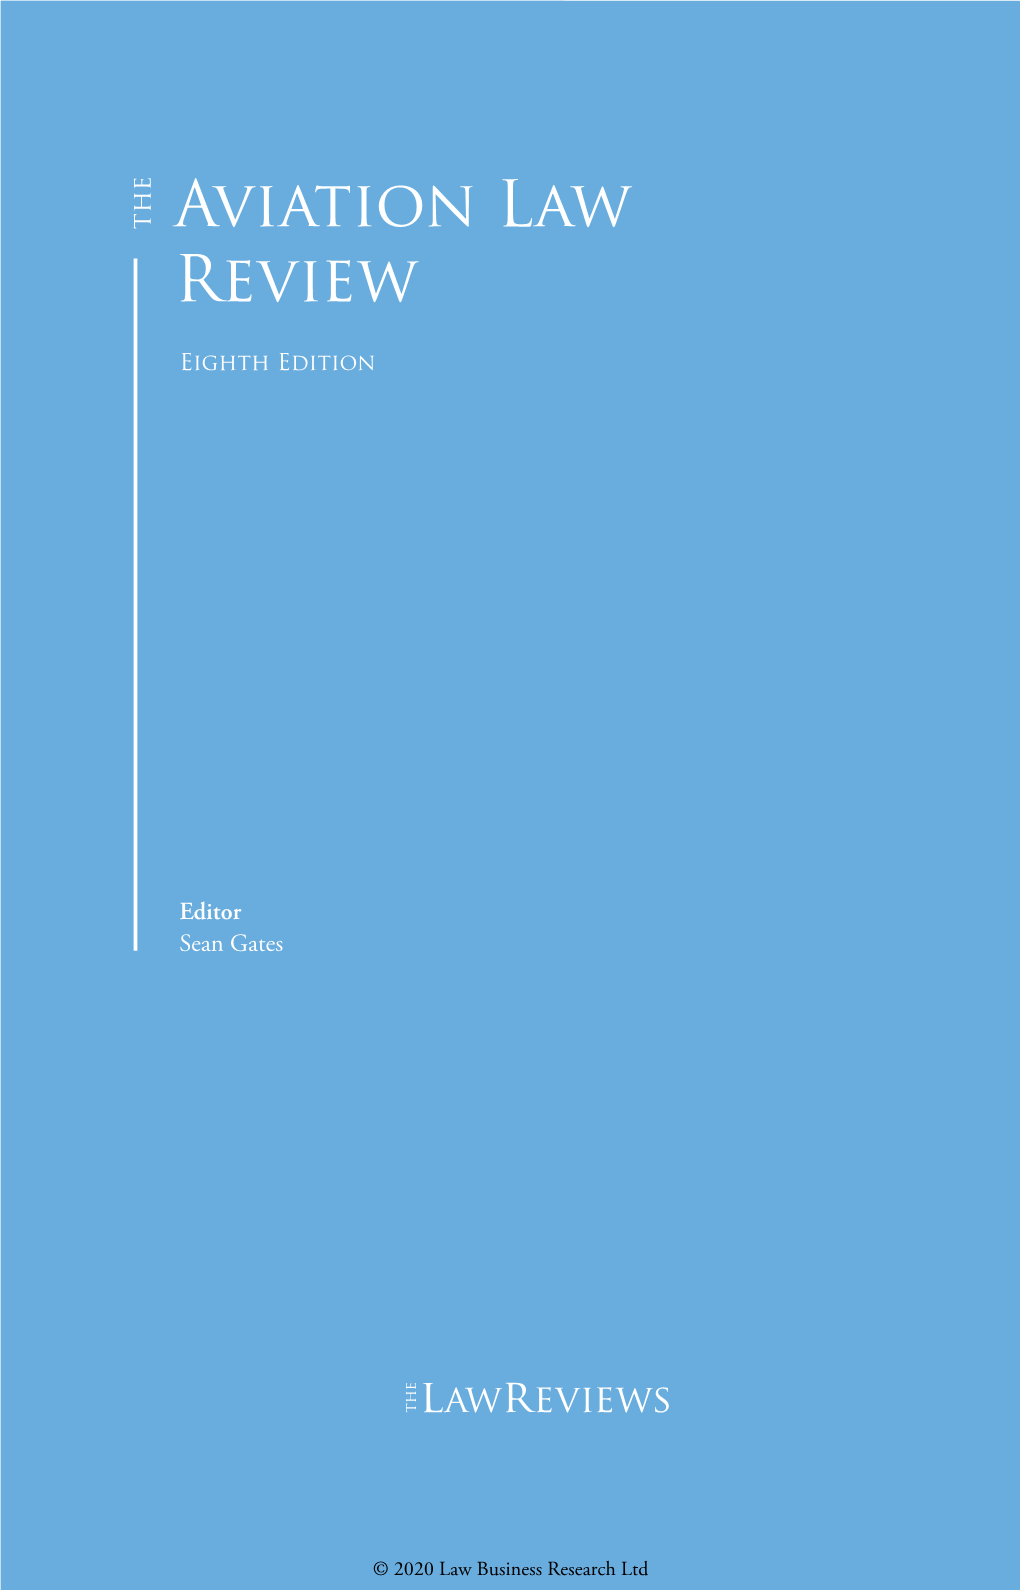 The Aviation Law Review Italy Eighth Edition